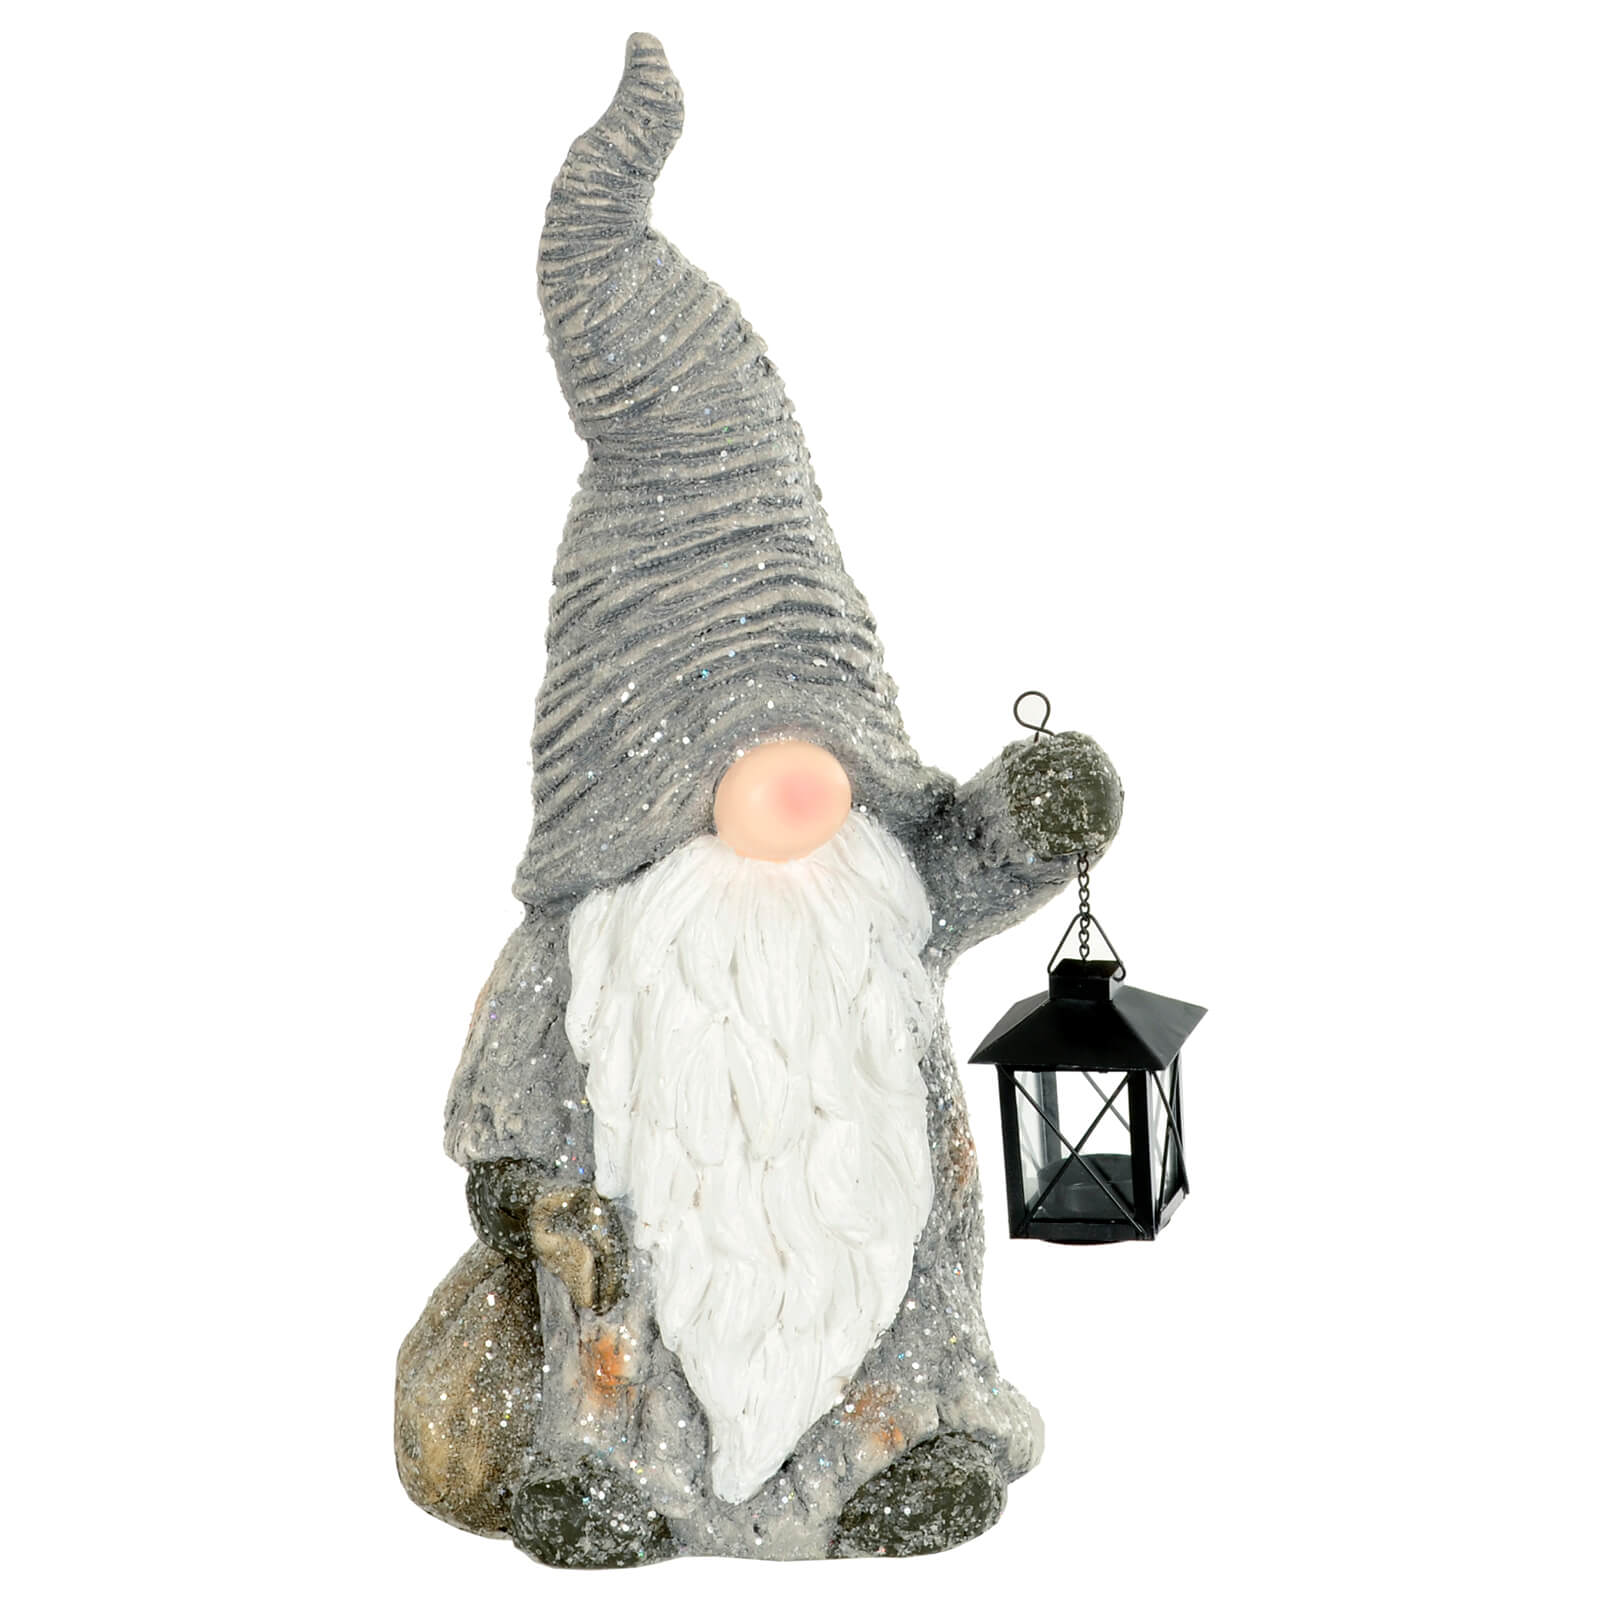 Gonk Christmas ceramic decoration ornaent with a black tealight lantern and sack, in grey and white